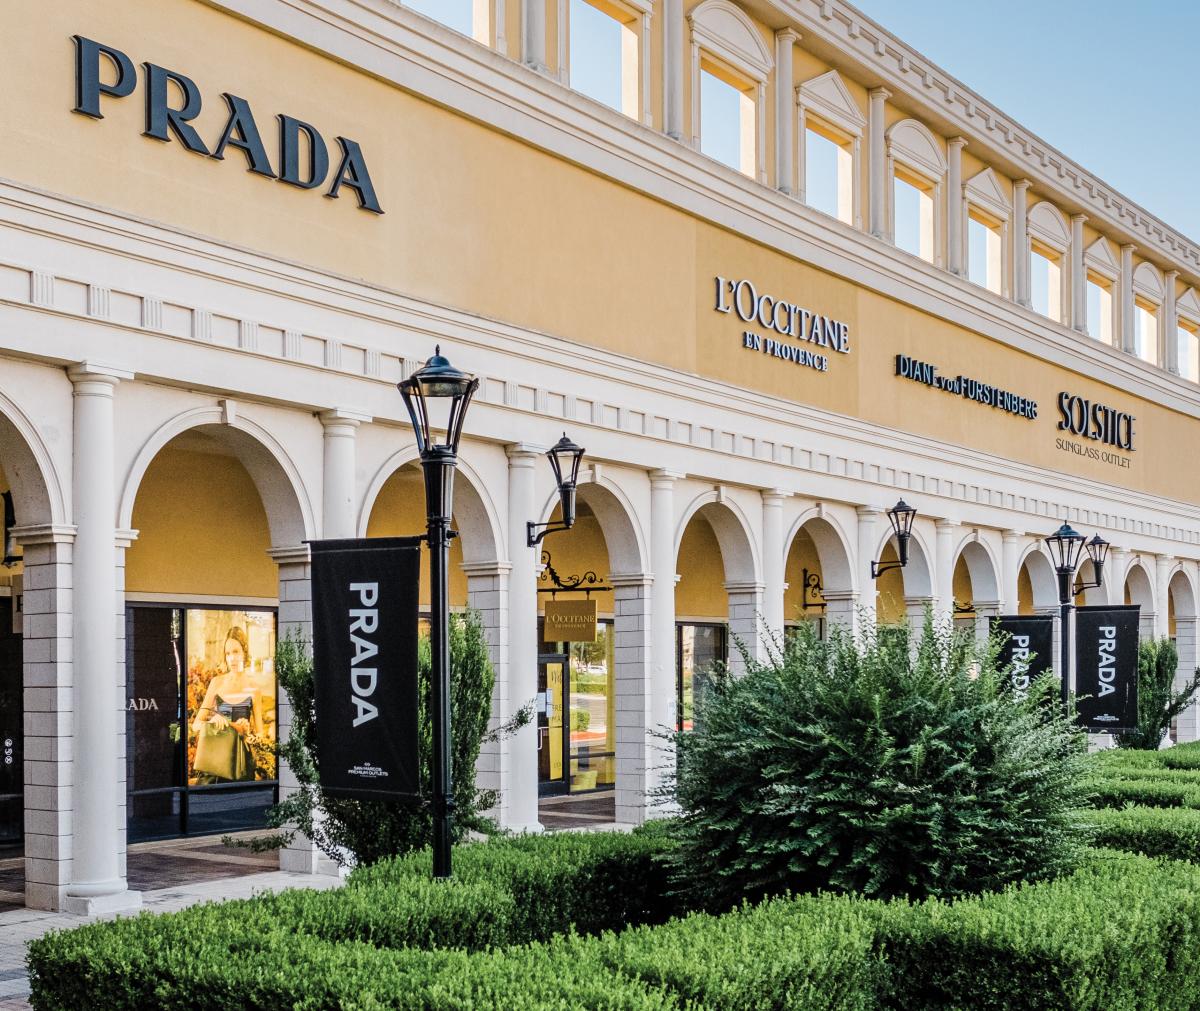 Luxury store brands at outlet center